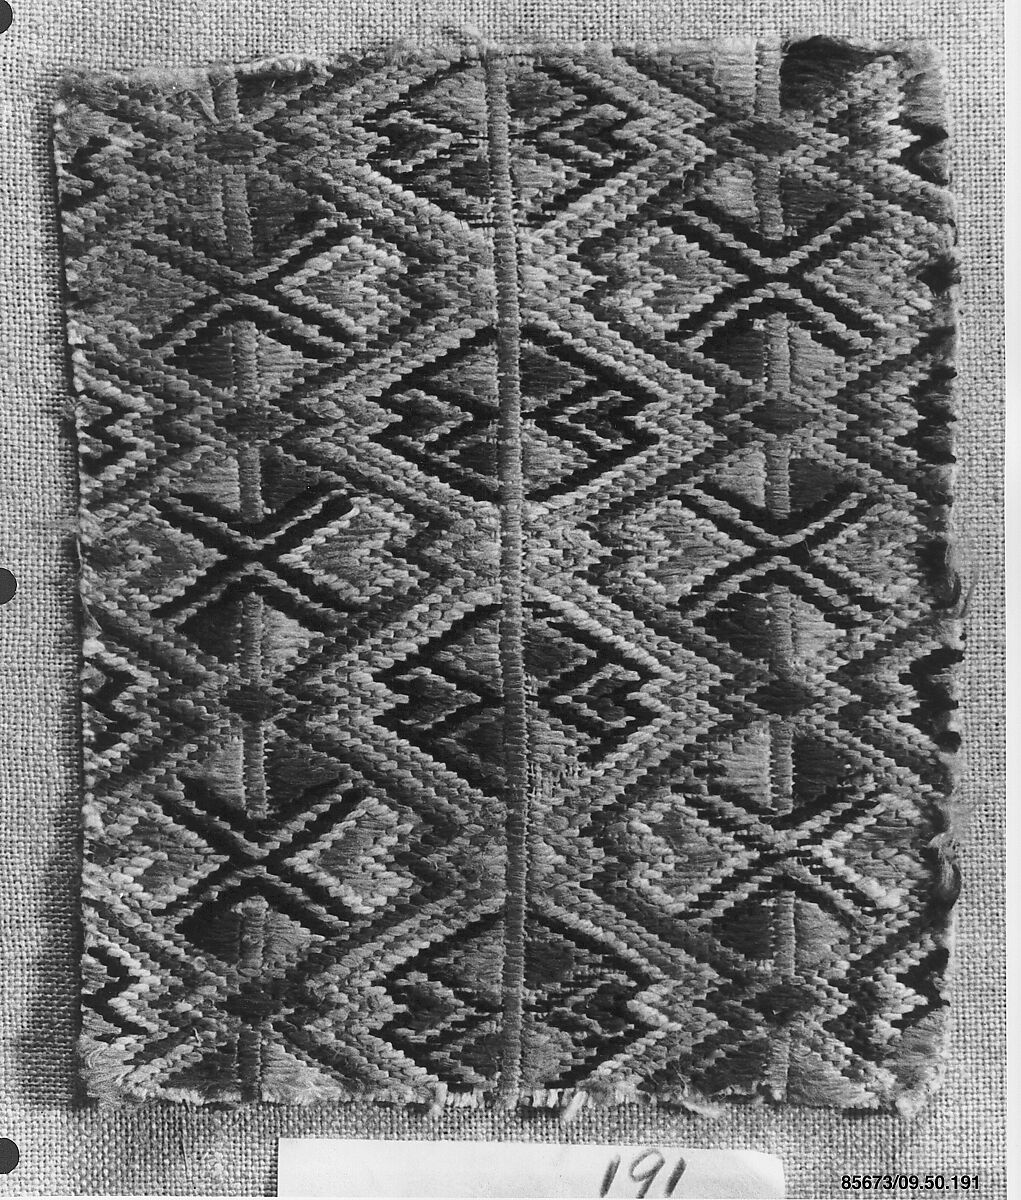 Peasant costume fragment, Wool on linen, Albanian or Montenegrin 